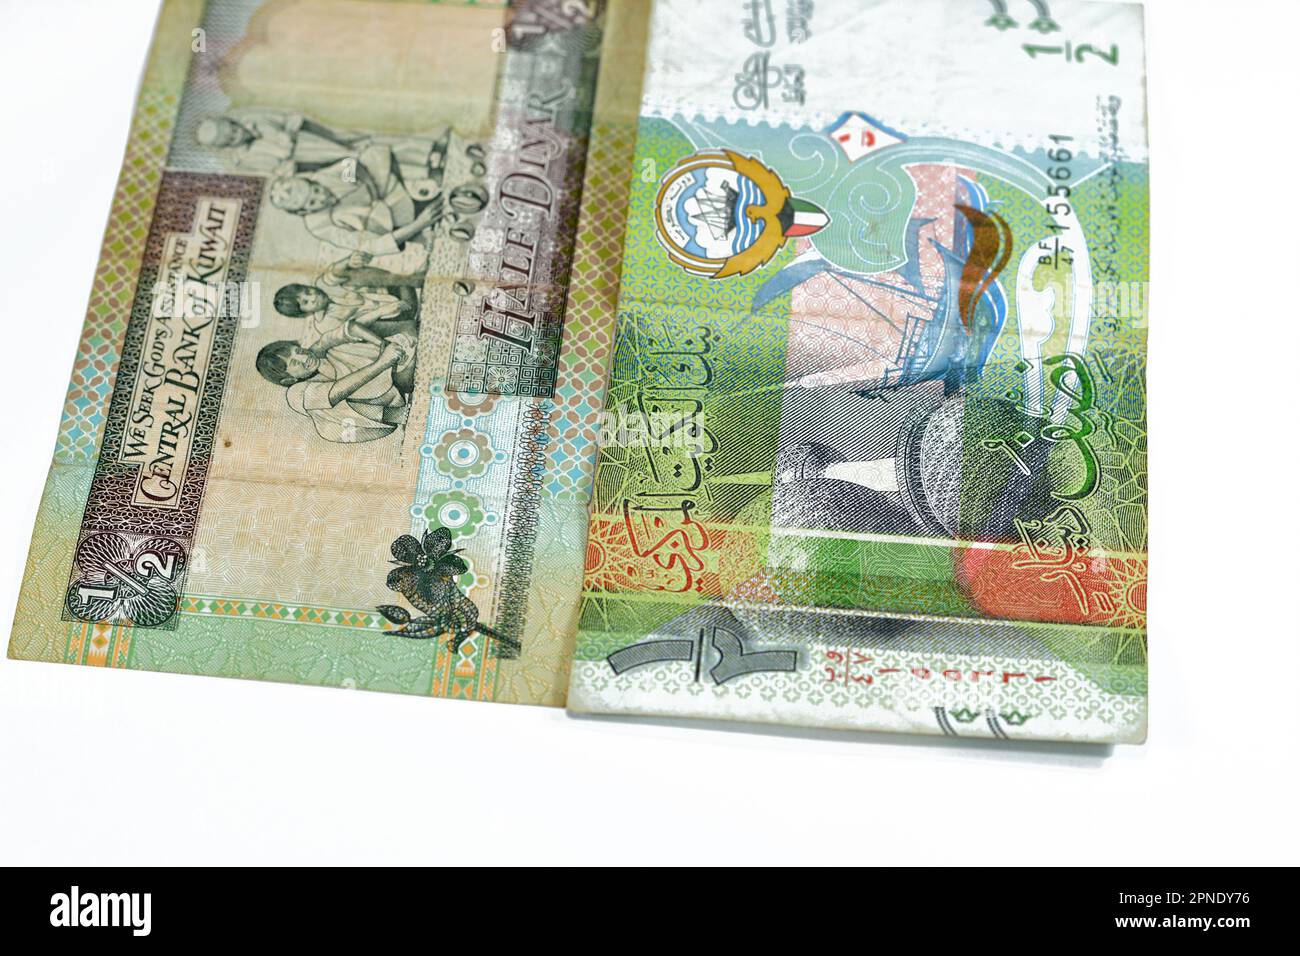 Old and new Kuwaiti half dinar bill banknotes money coat of arms of Kuwait, vignette changers' stalls, vignette of coffee pot, Kuwait Towers and a dho Stock Photo